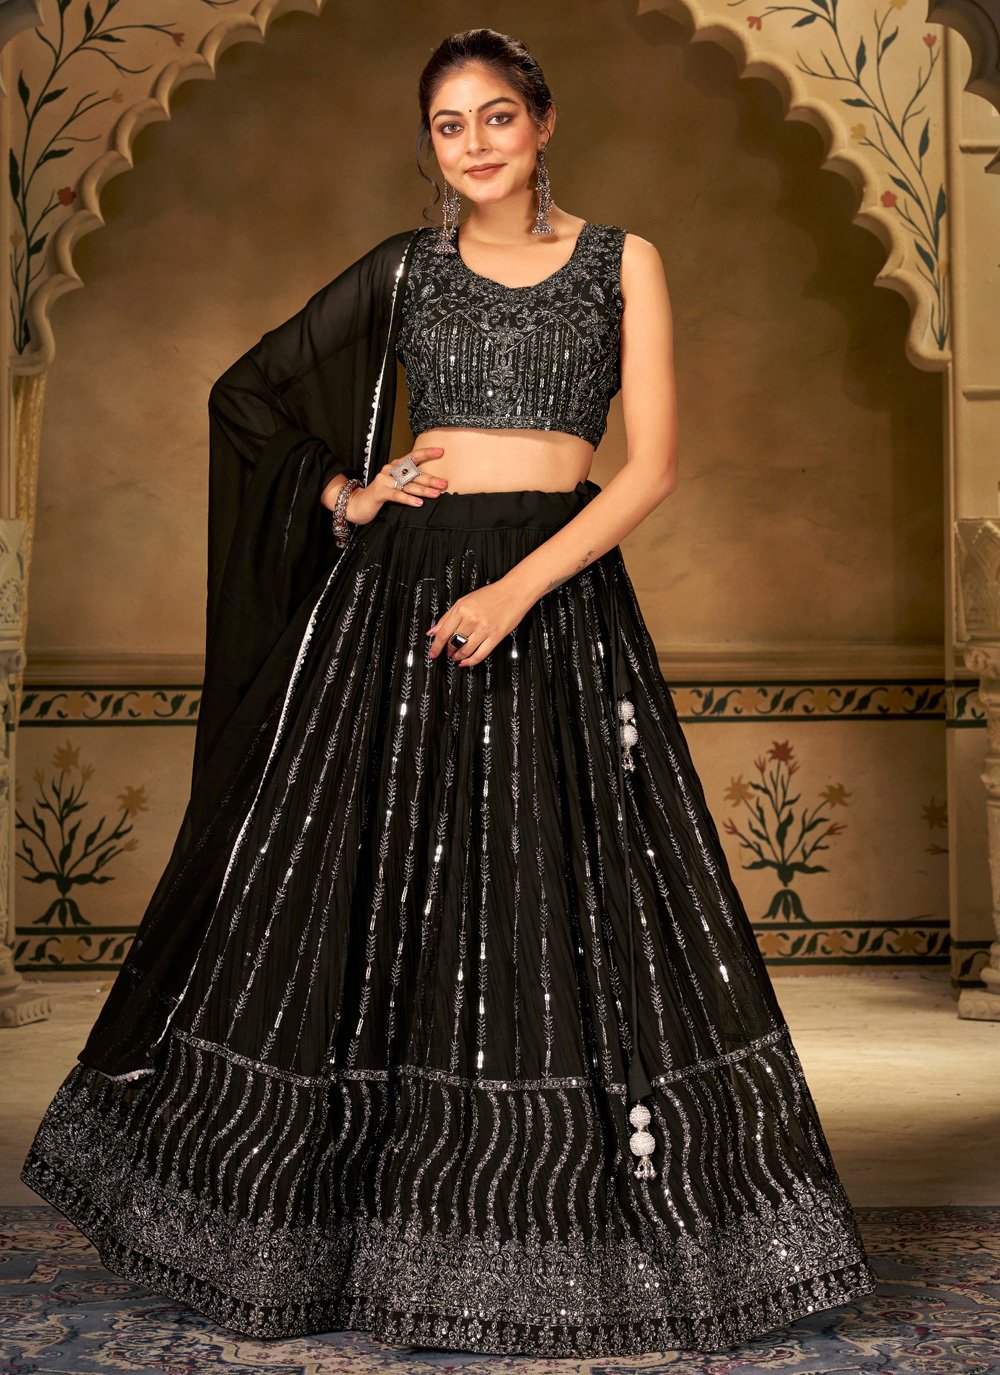 Black Banarasi Silk Lehenga Choli, Now Available as a Ready-to-wear  Ensemble in the USA With Free Shipping. - Etsy Finland